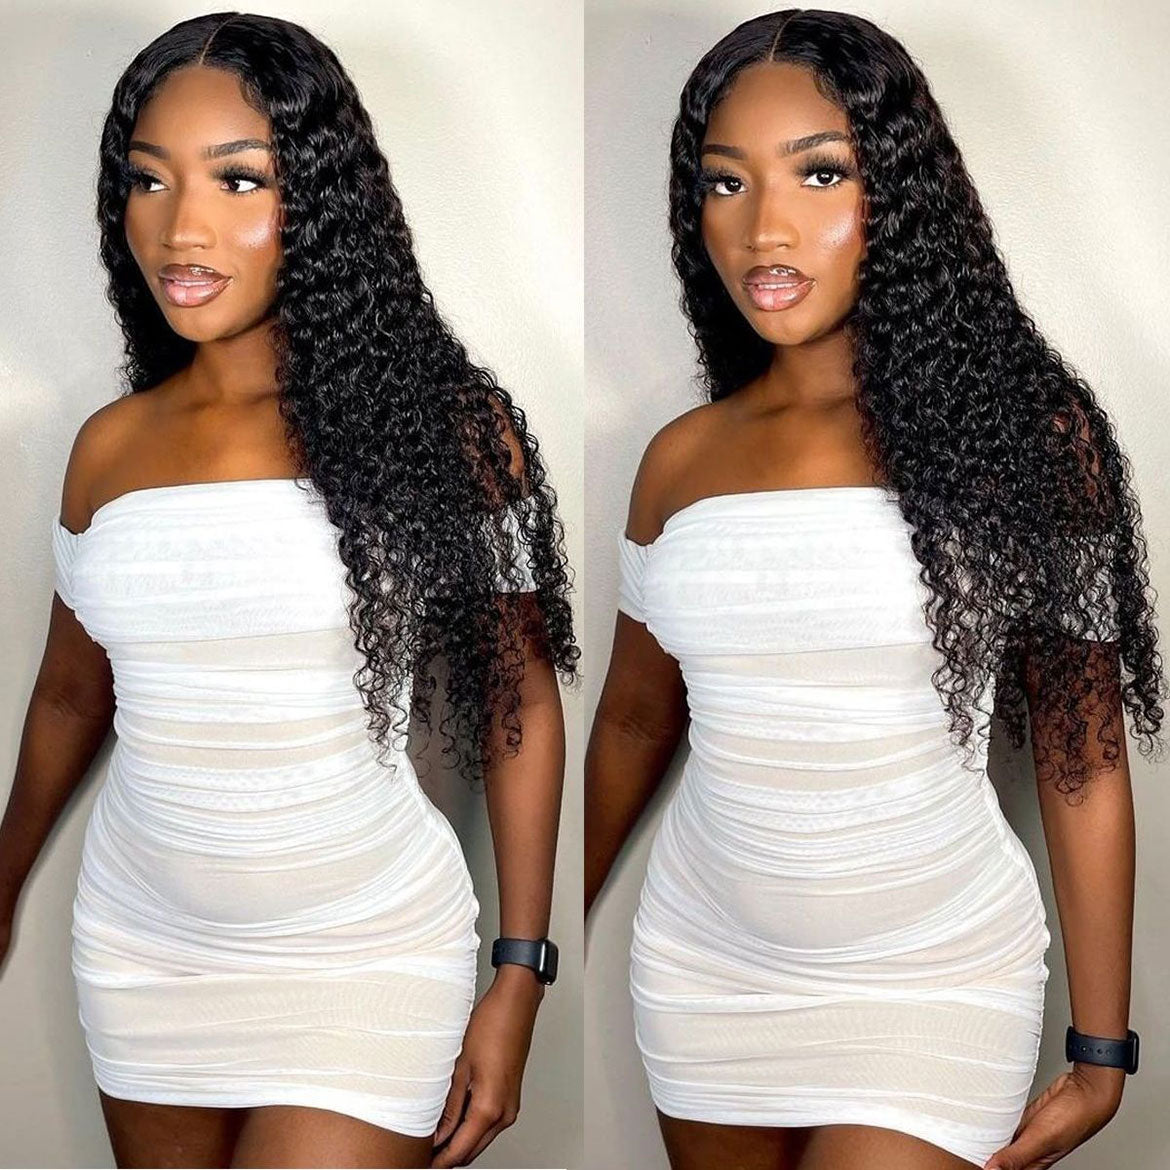 VRBest Affordable 4x4 Lace Closure Wigs Curly Human Hair Wigs